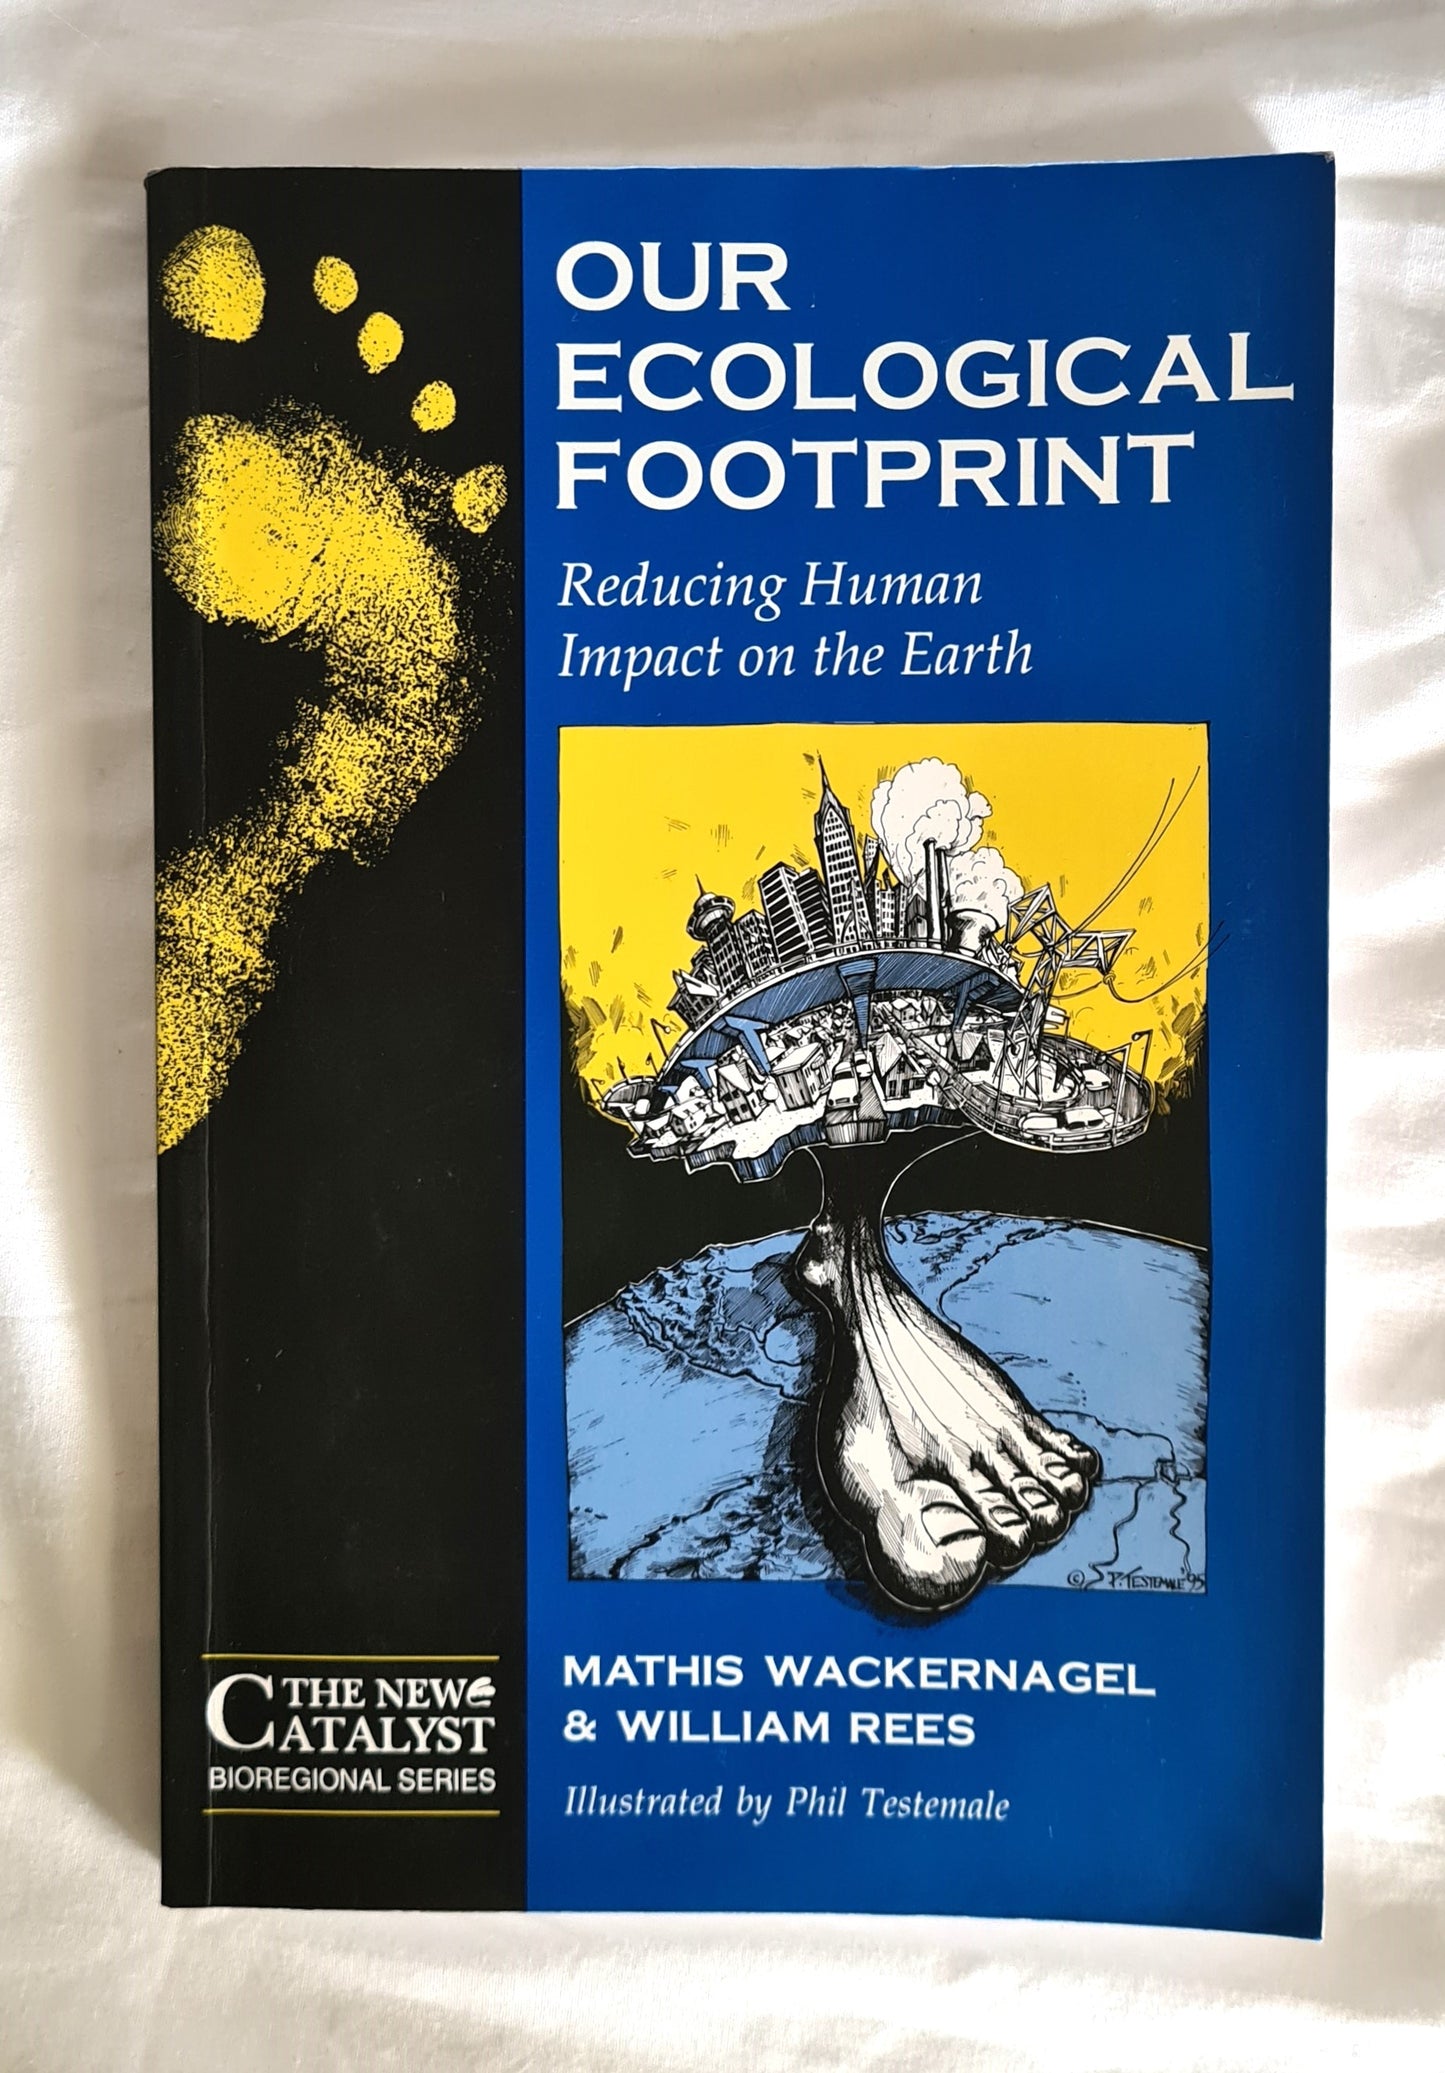 Our Ecological Footprint  Reducing Human Impact on the Earth  by Mathis Wackernagel and William Rees  Illustrated by Phil Testemale